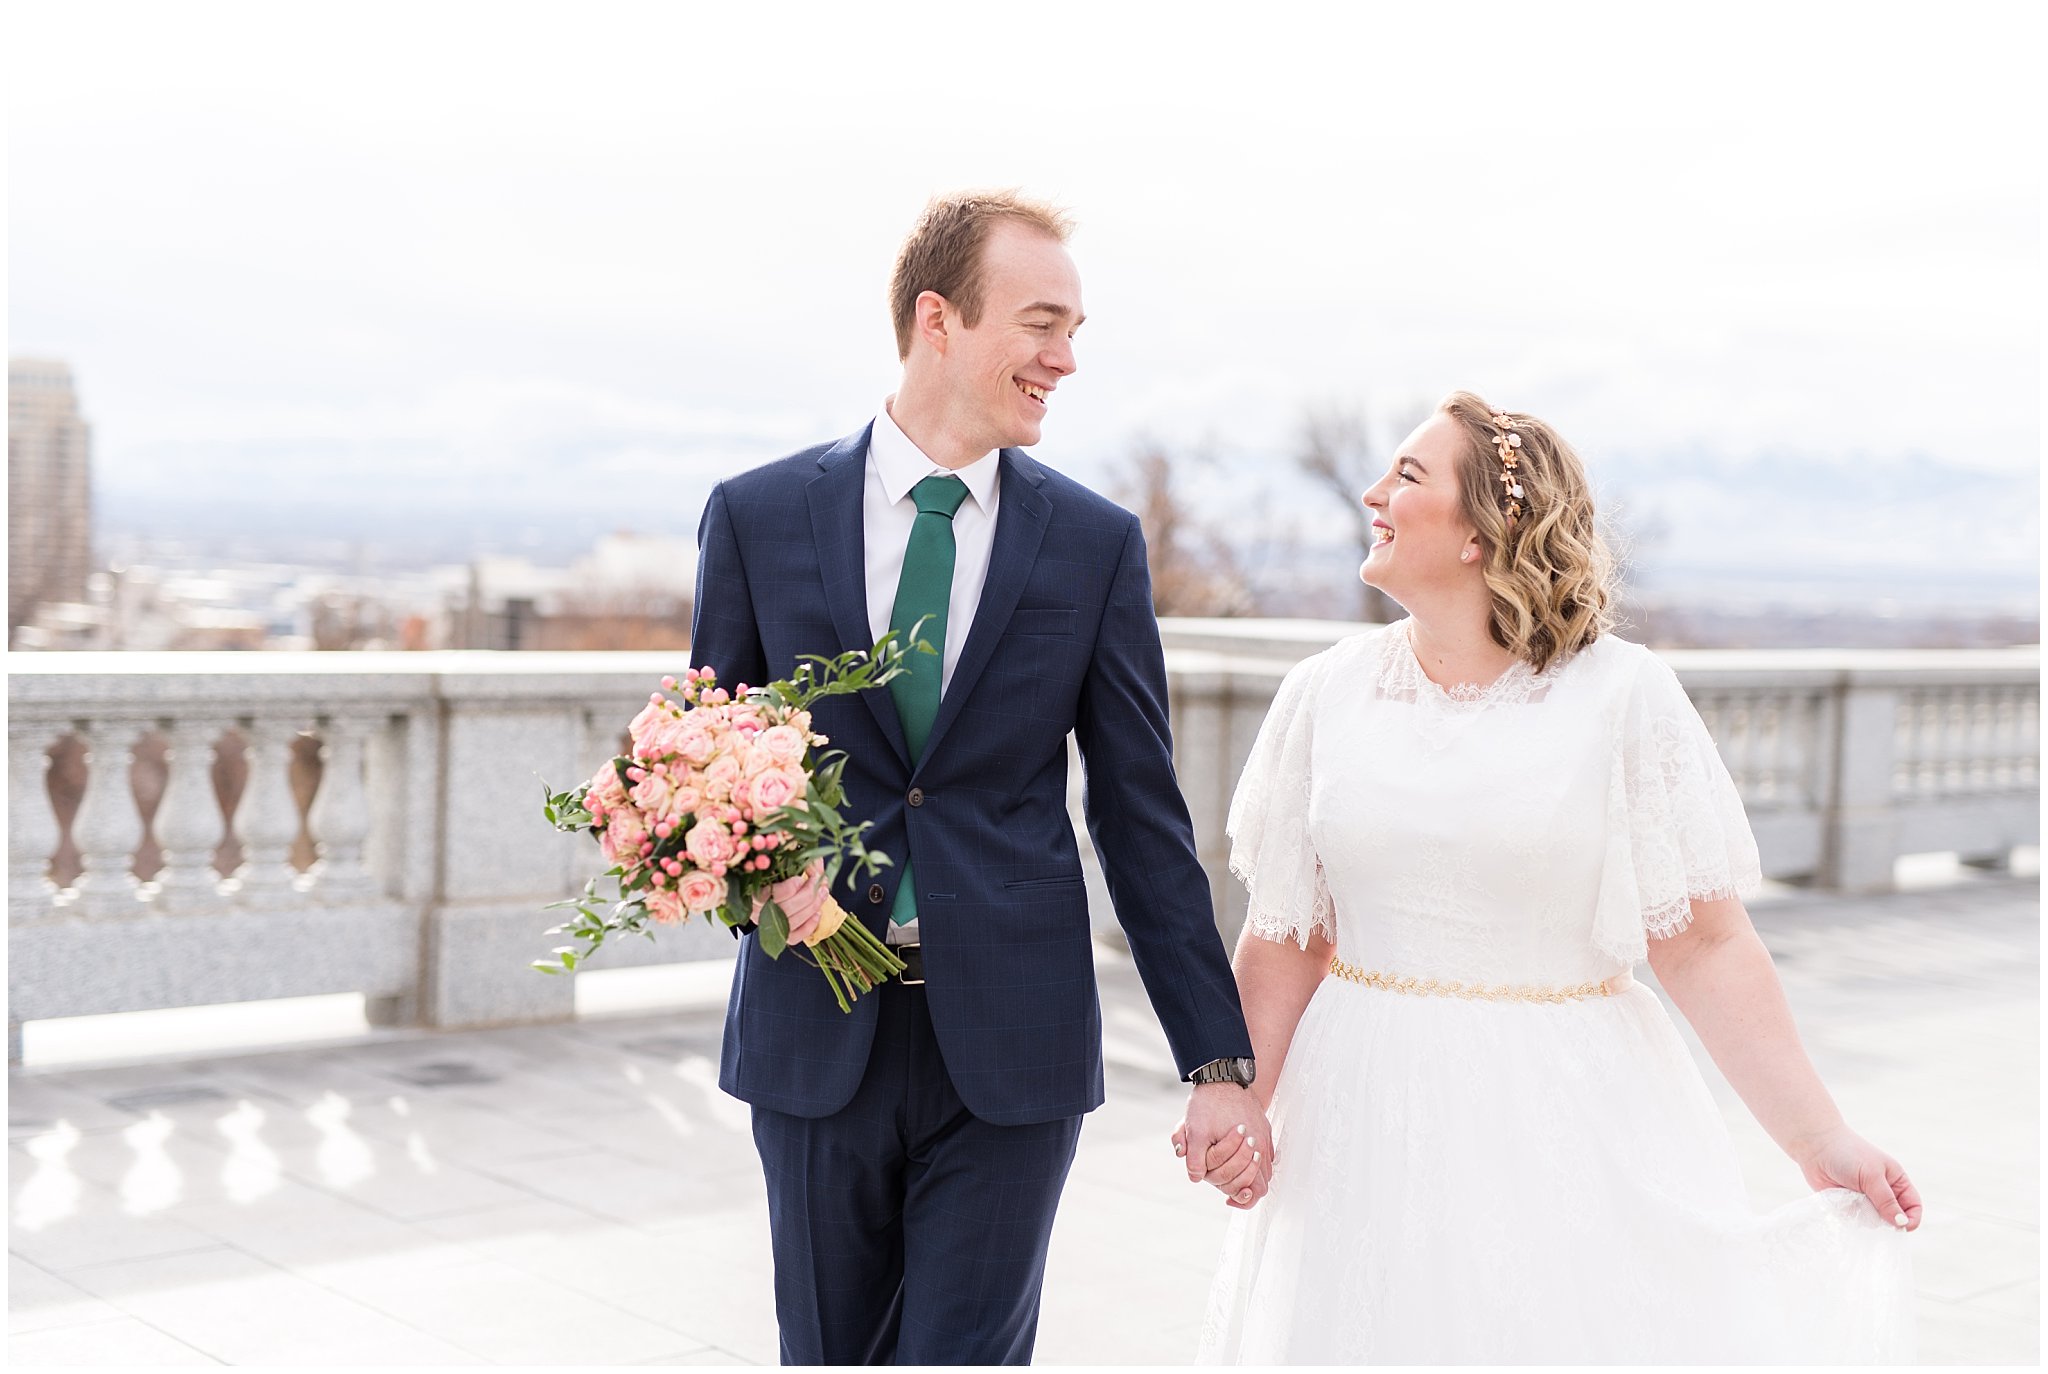 Bride and groom walking and groom holding bouquet | Winter Formals at the Utah State Capitol | Utah Wedding Photography